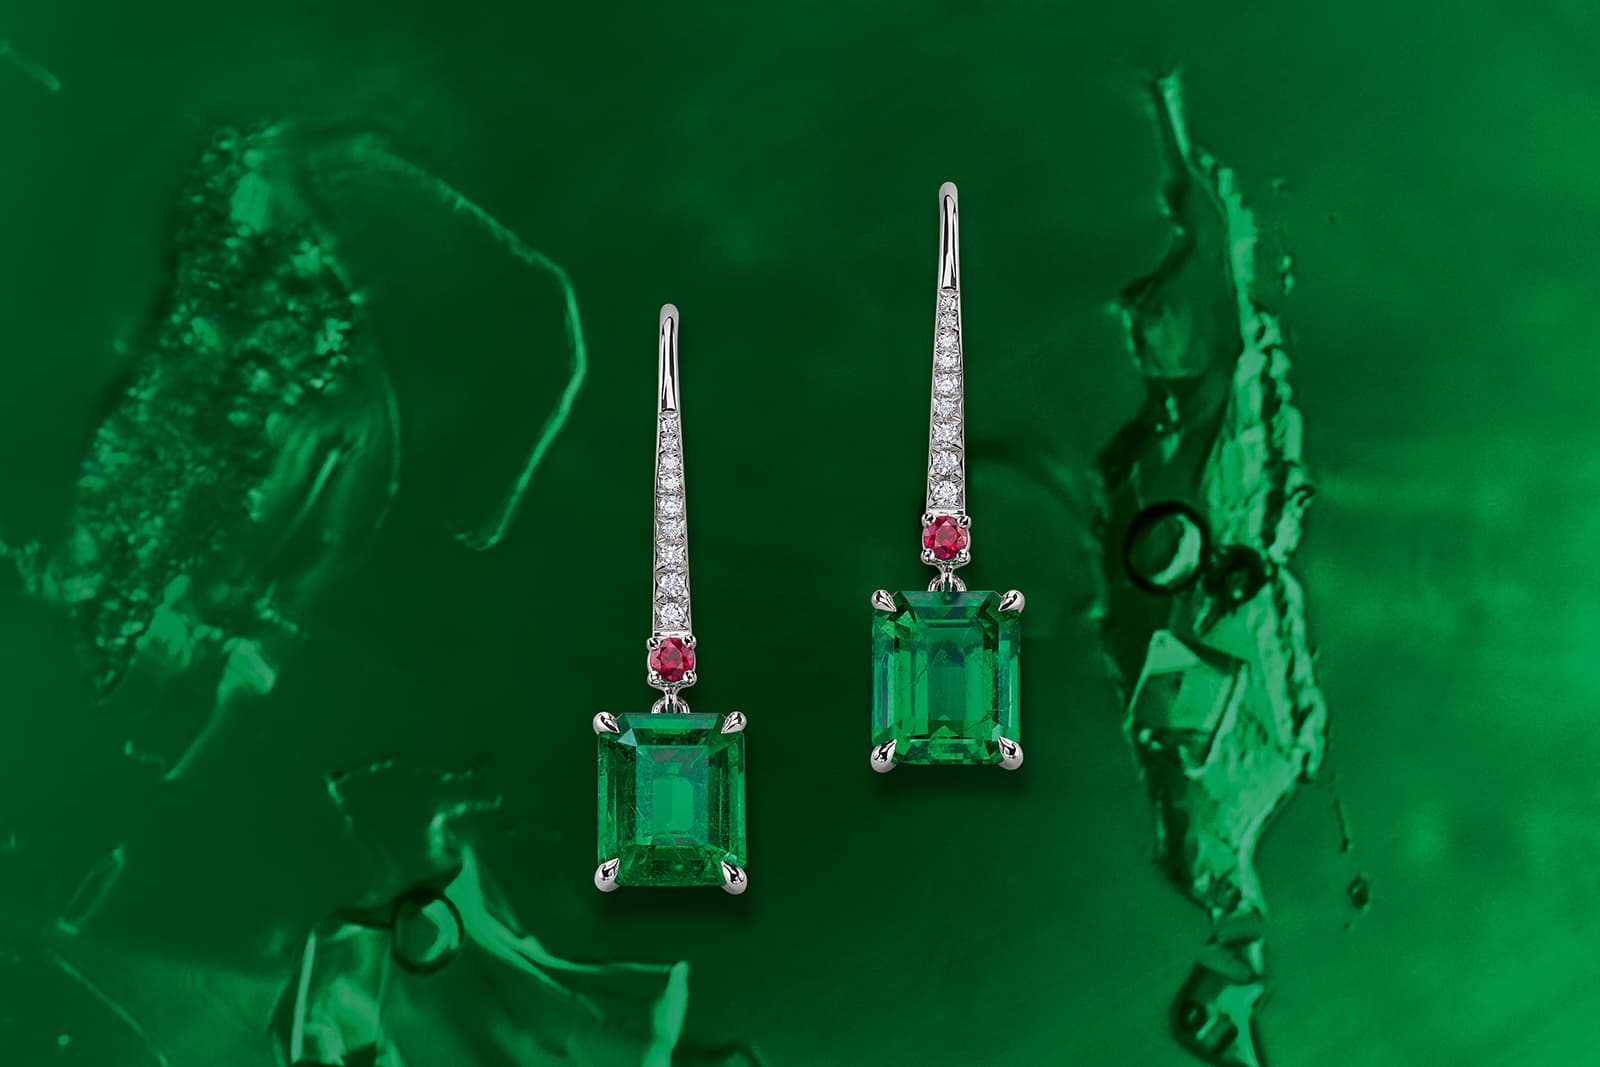 Gübelin Jewellery earrings from the Ancient Path collection, set with emerald-cut emeralds and diamonds